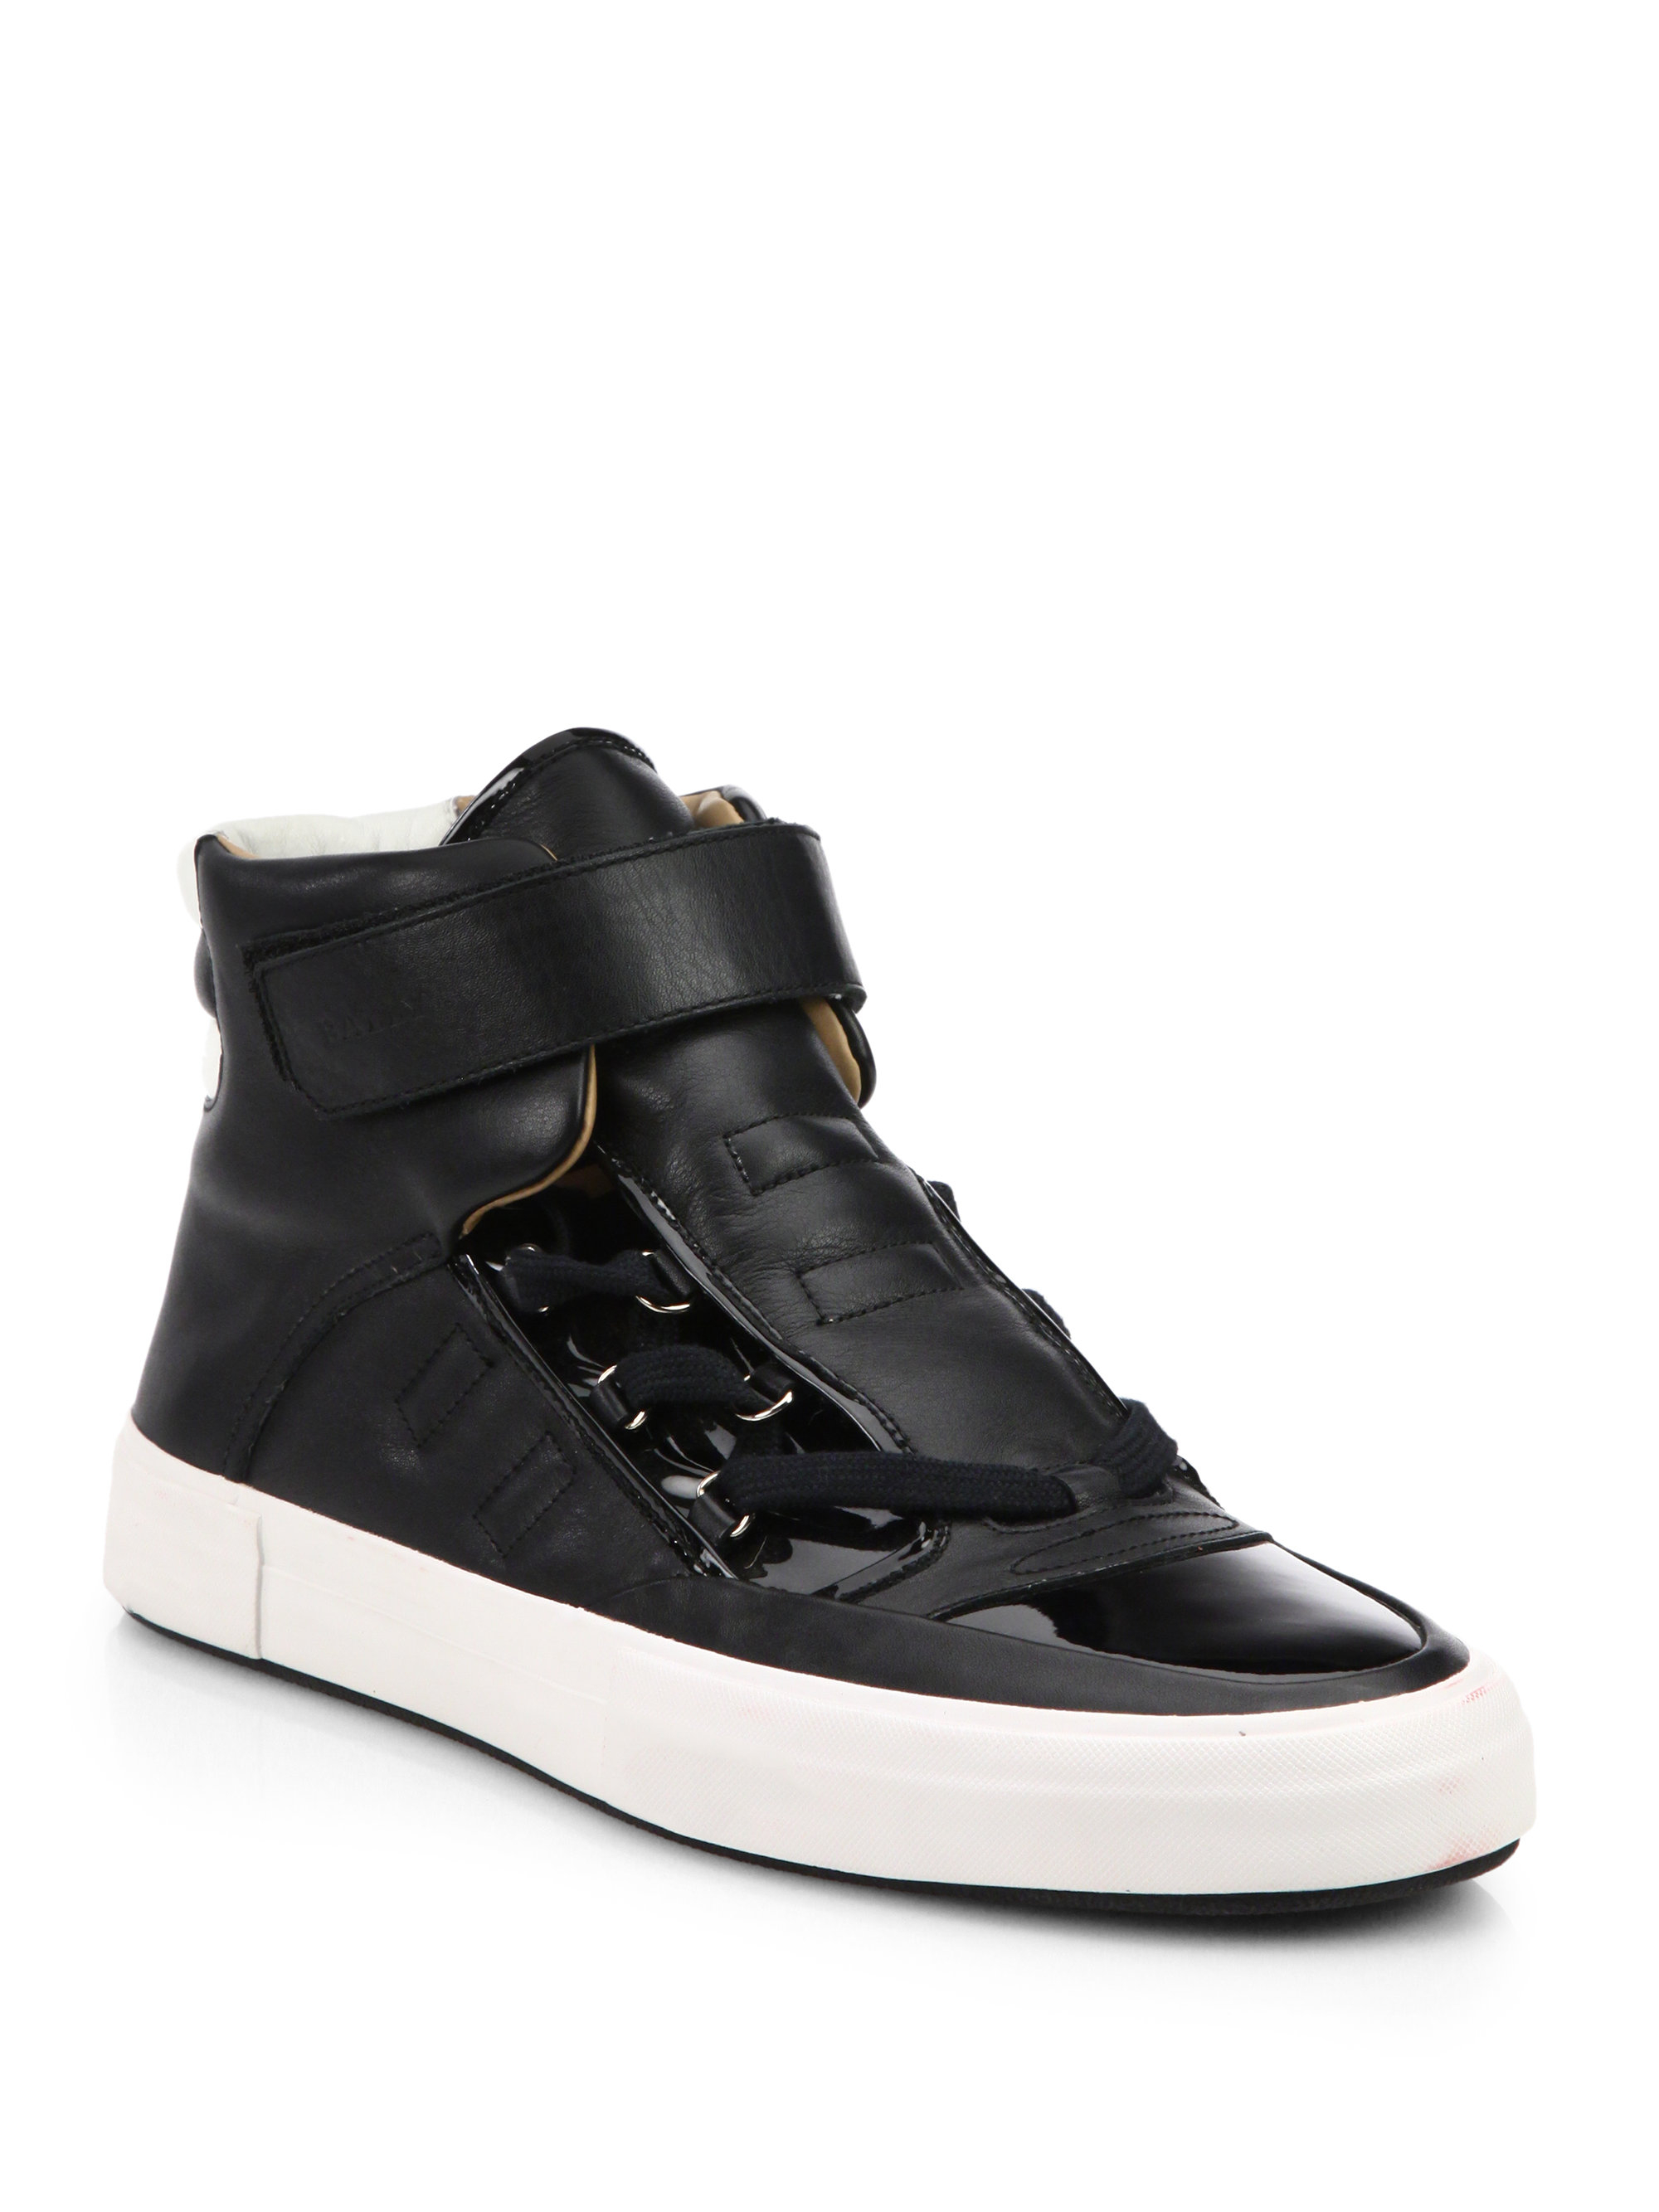 Lyst - Bally Mixed Media High-top Sneakers in Black